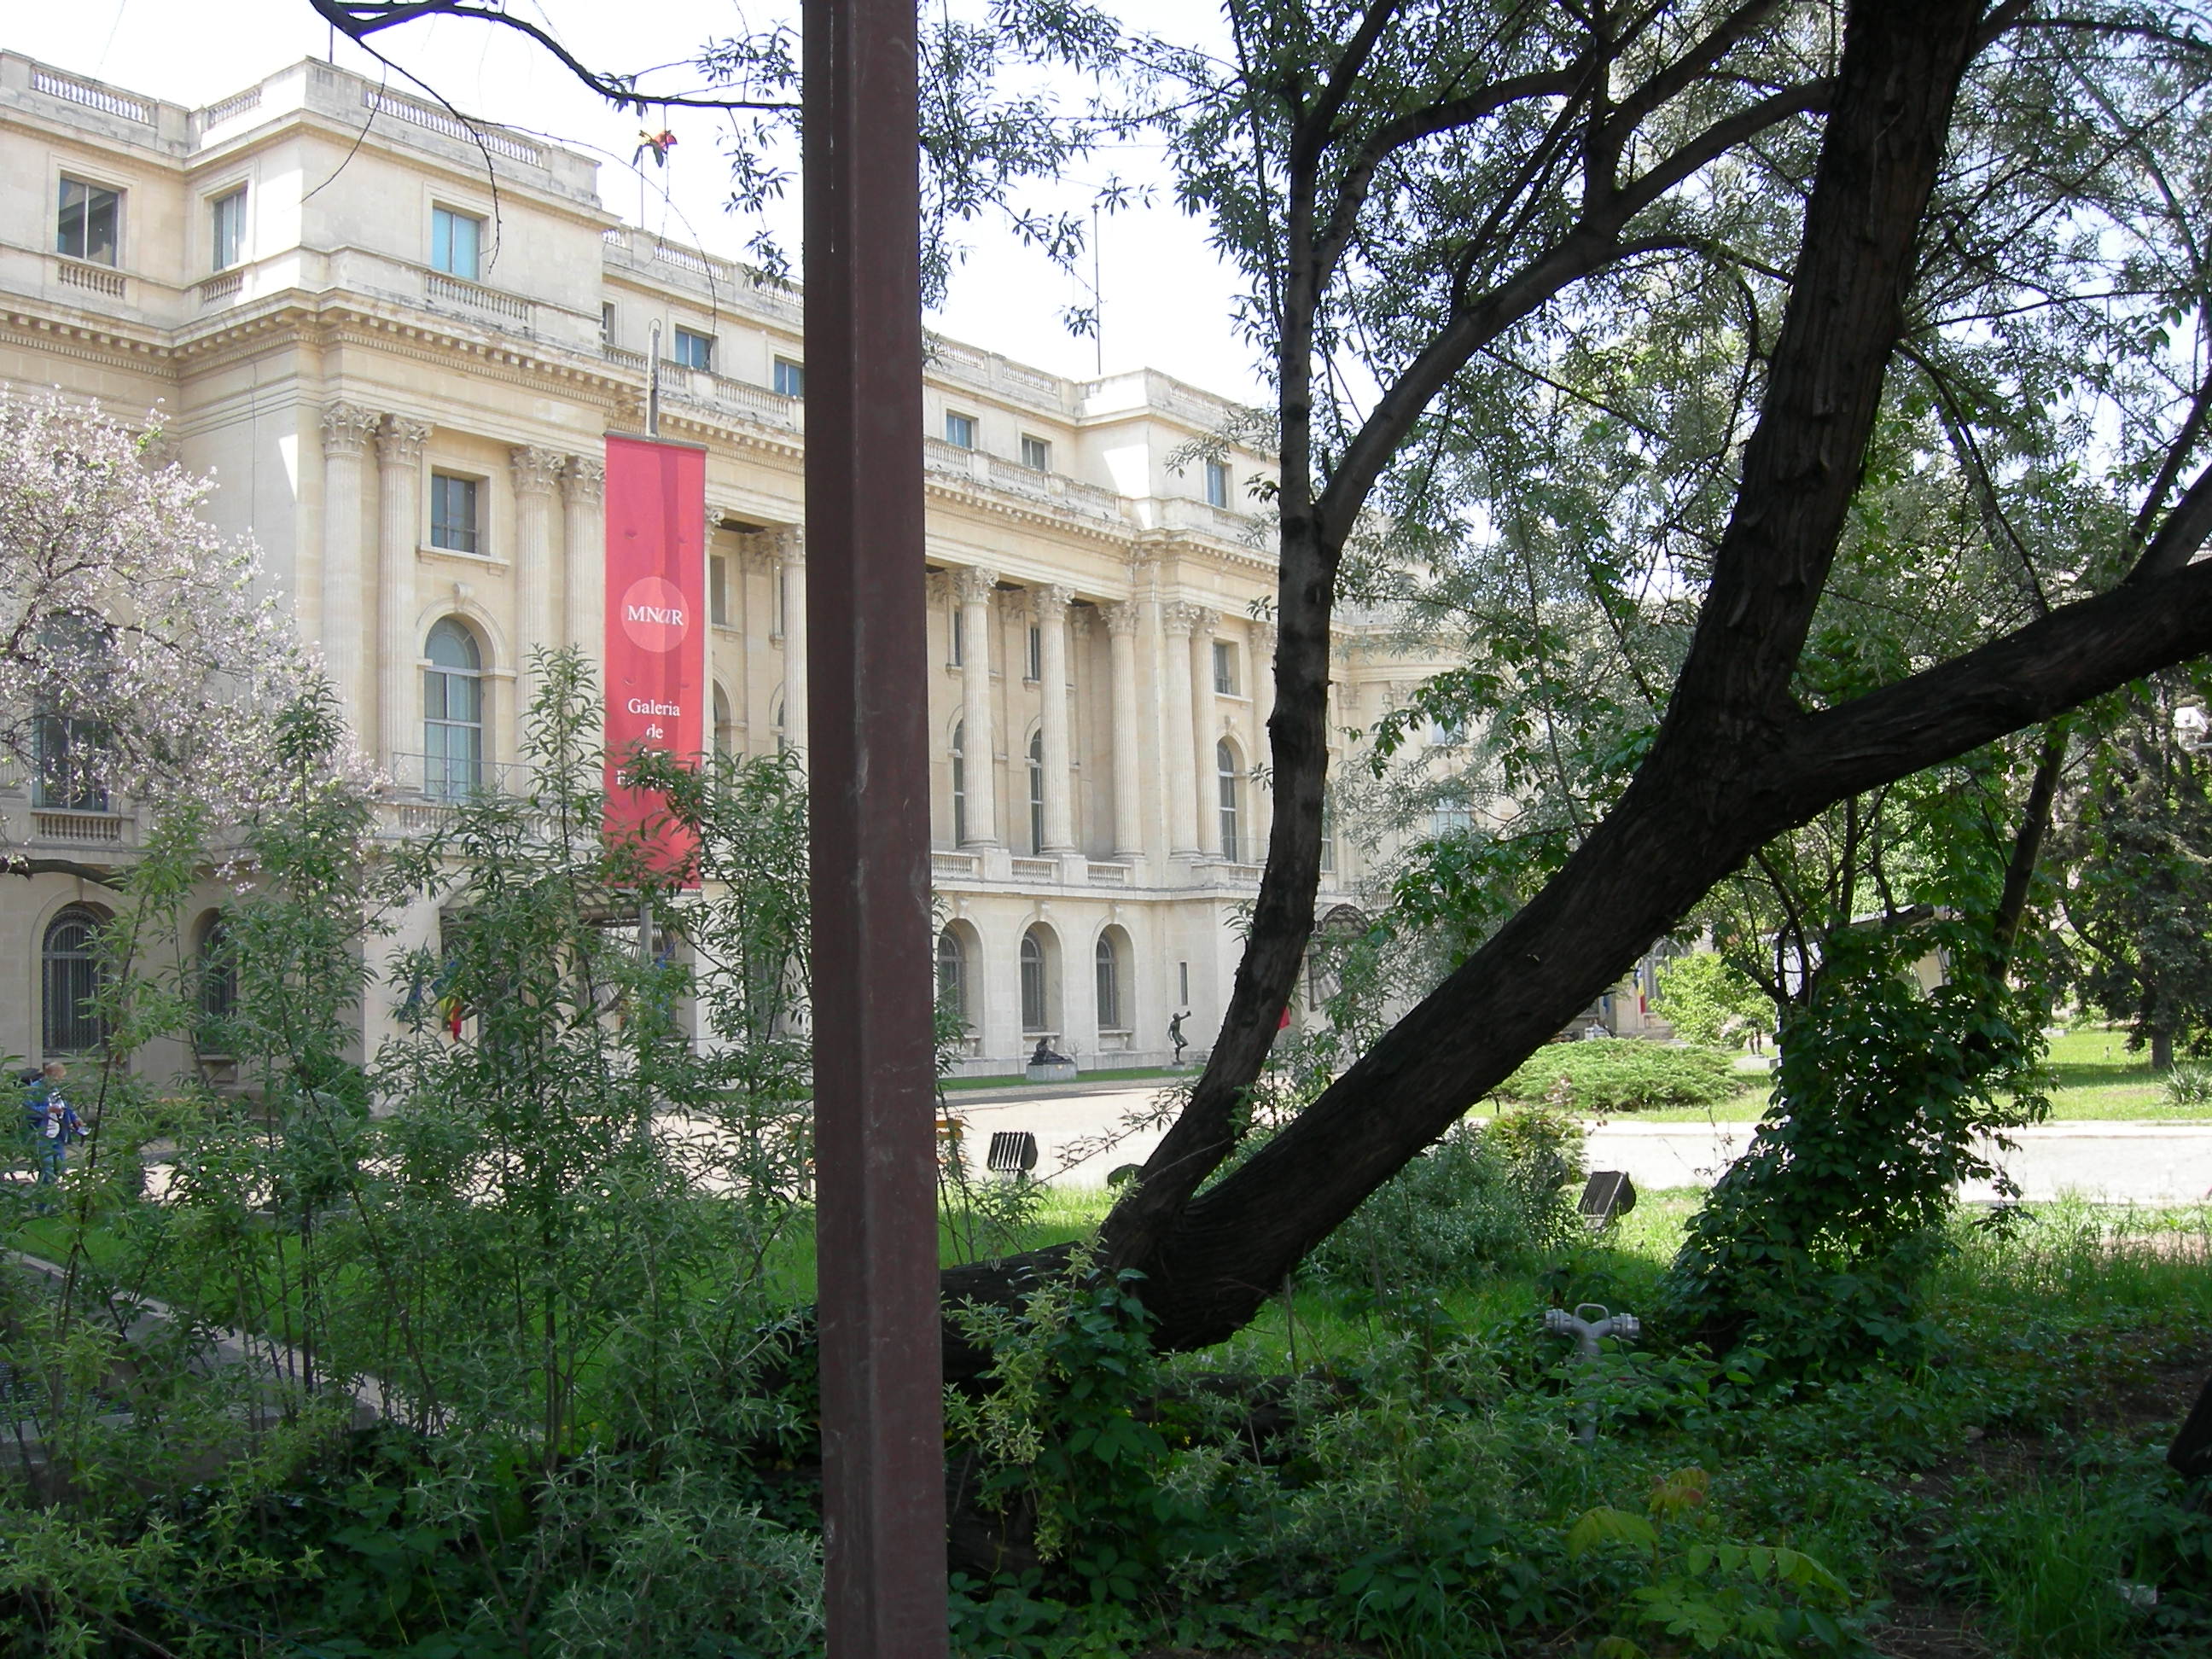 National Gallery, former royal palace